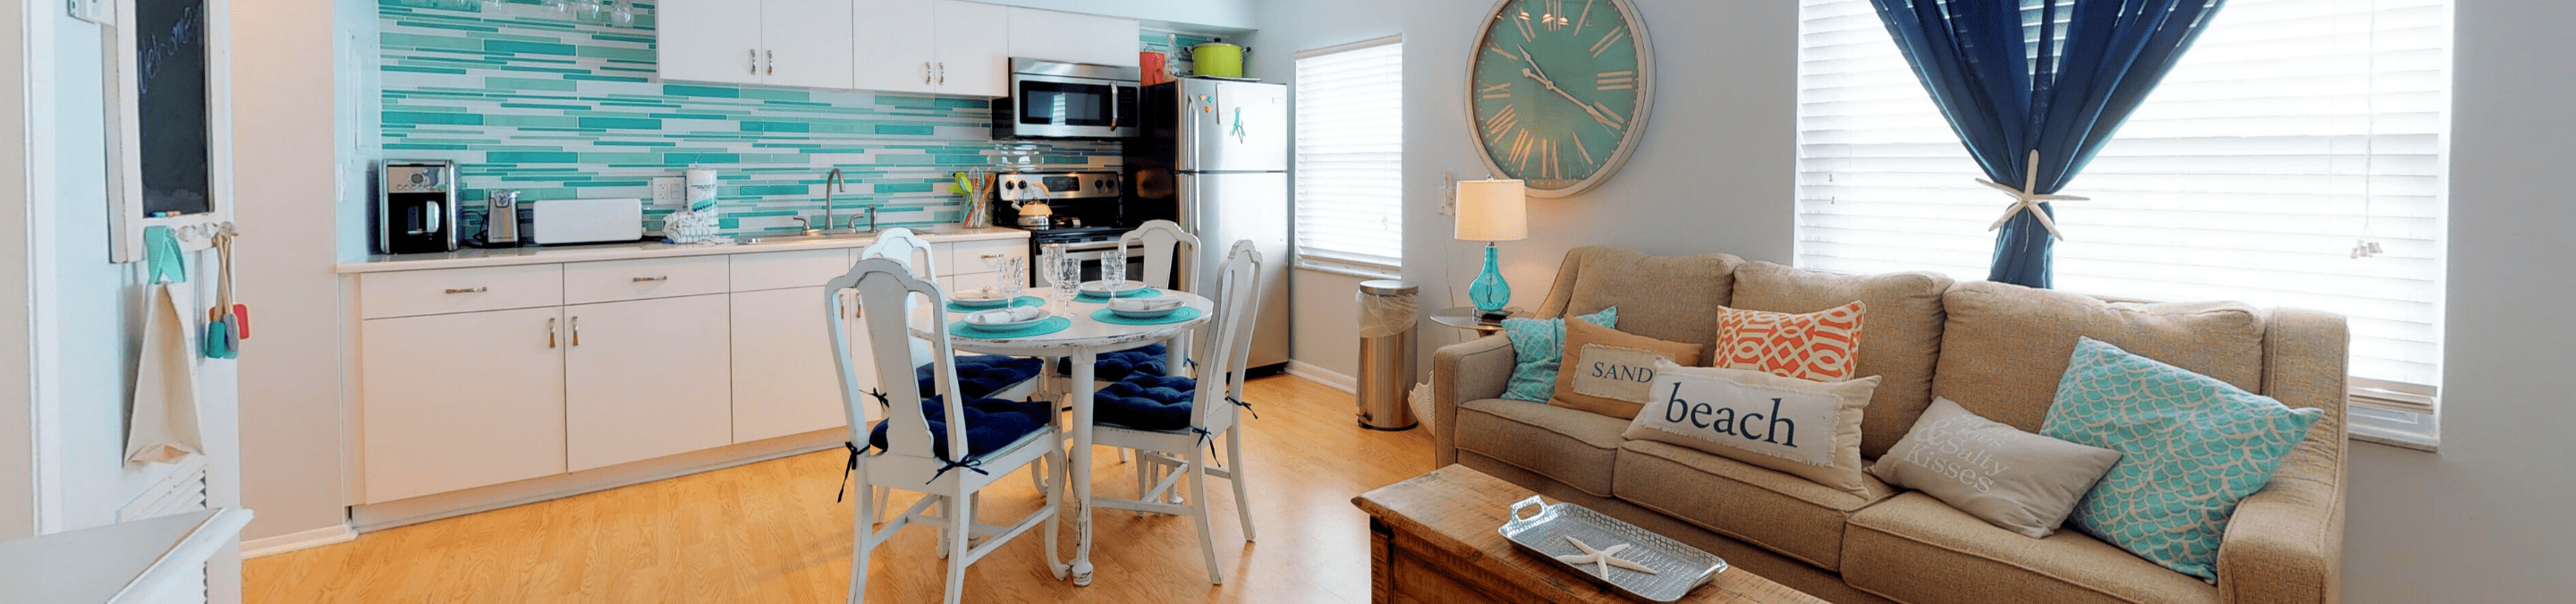 One of our beautiful 1 bedroom rentals anna maria island open area of living room and kitchen featuring a small round dining table for four in the middle located on Anna Maria Island